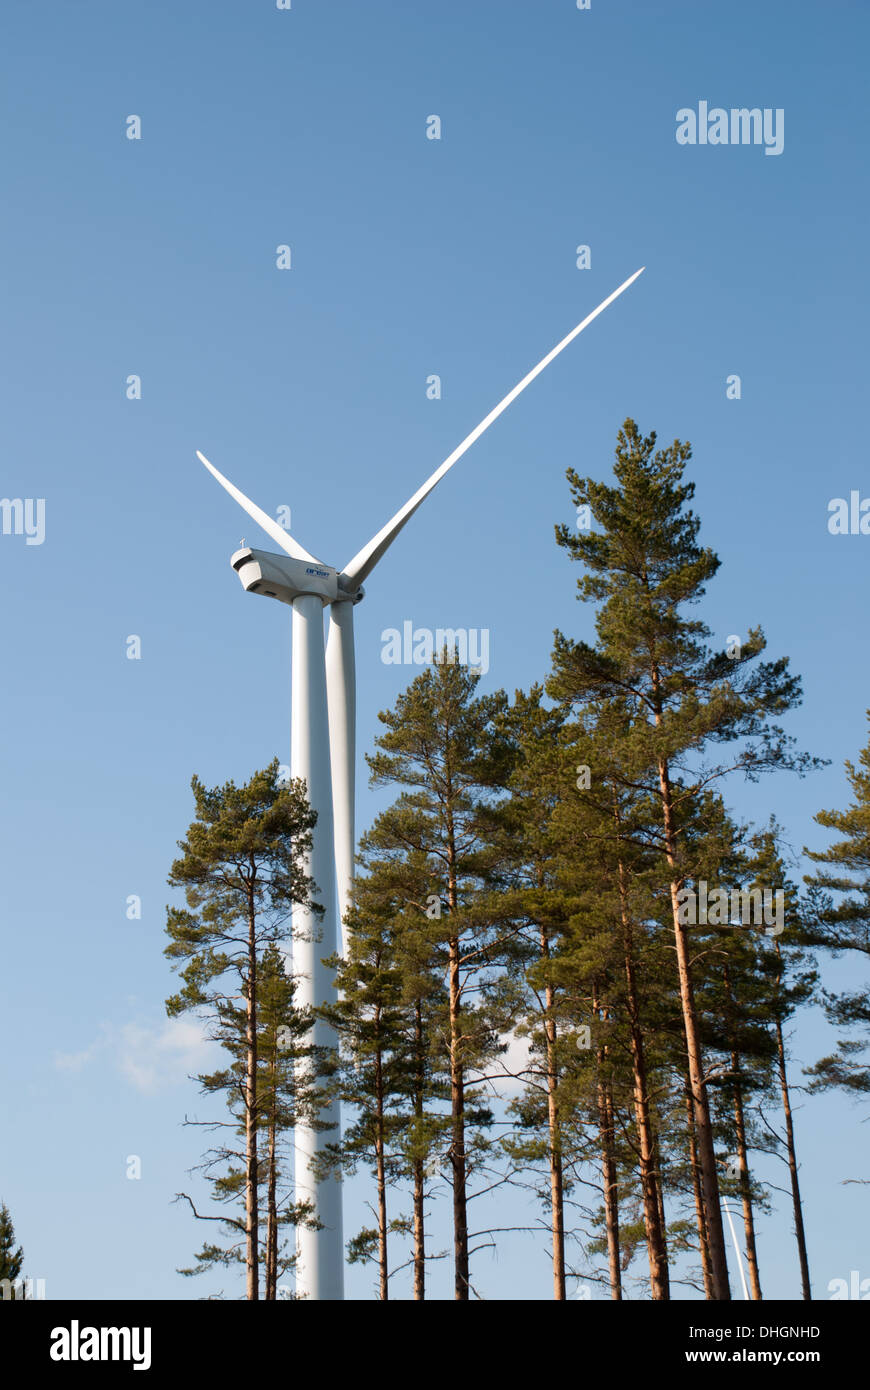 Windmill in forest Stock Photo